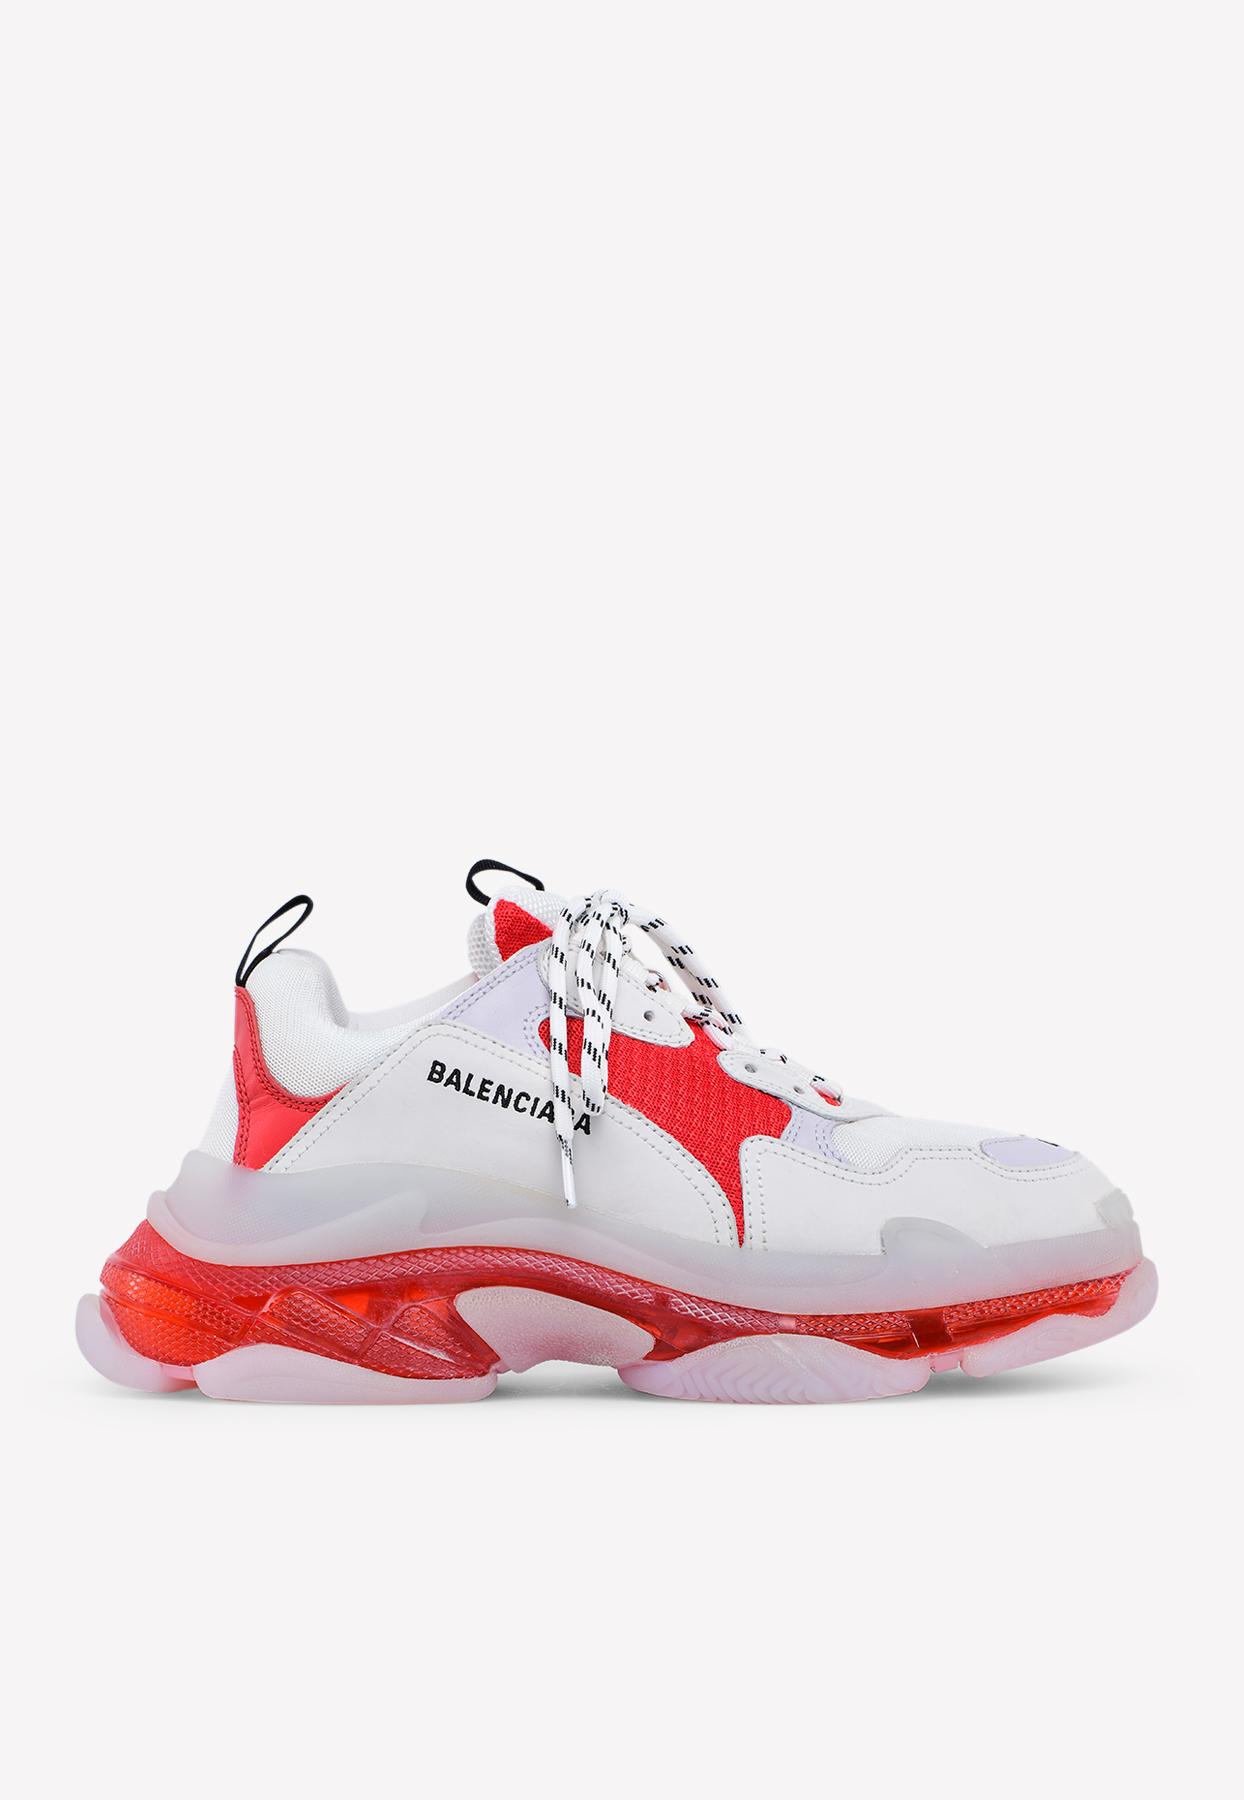 Balenciaga Triple S Sneakers In Mesh And Leather in White/Red (Red) for Men  - Lyst